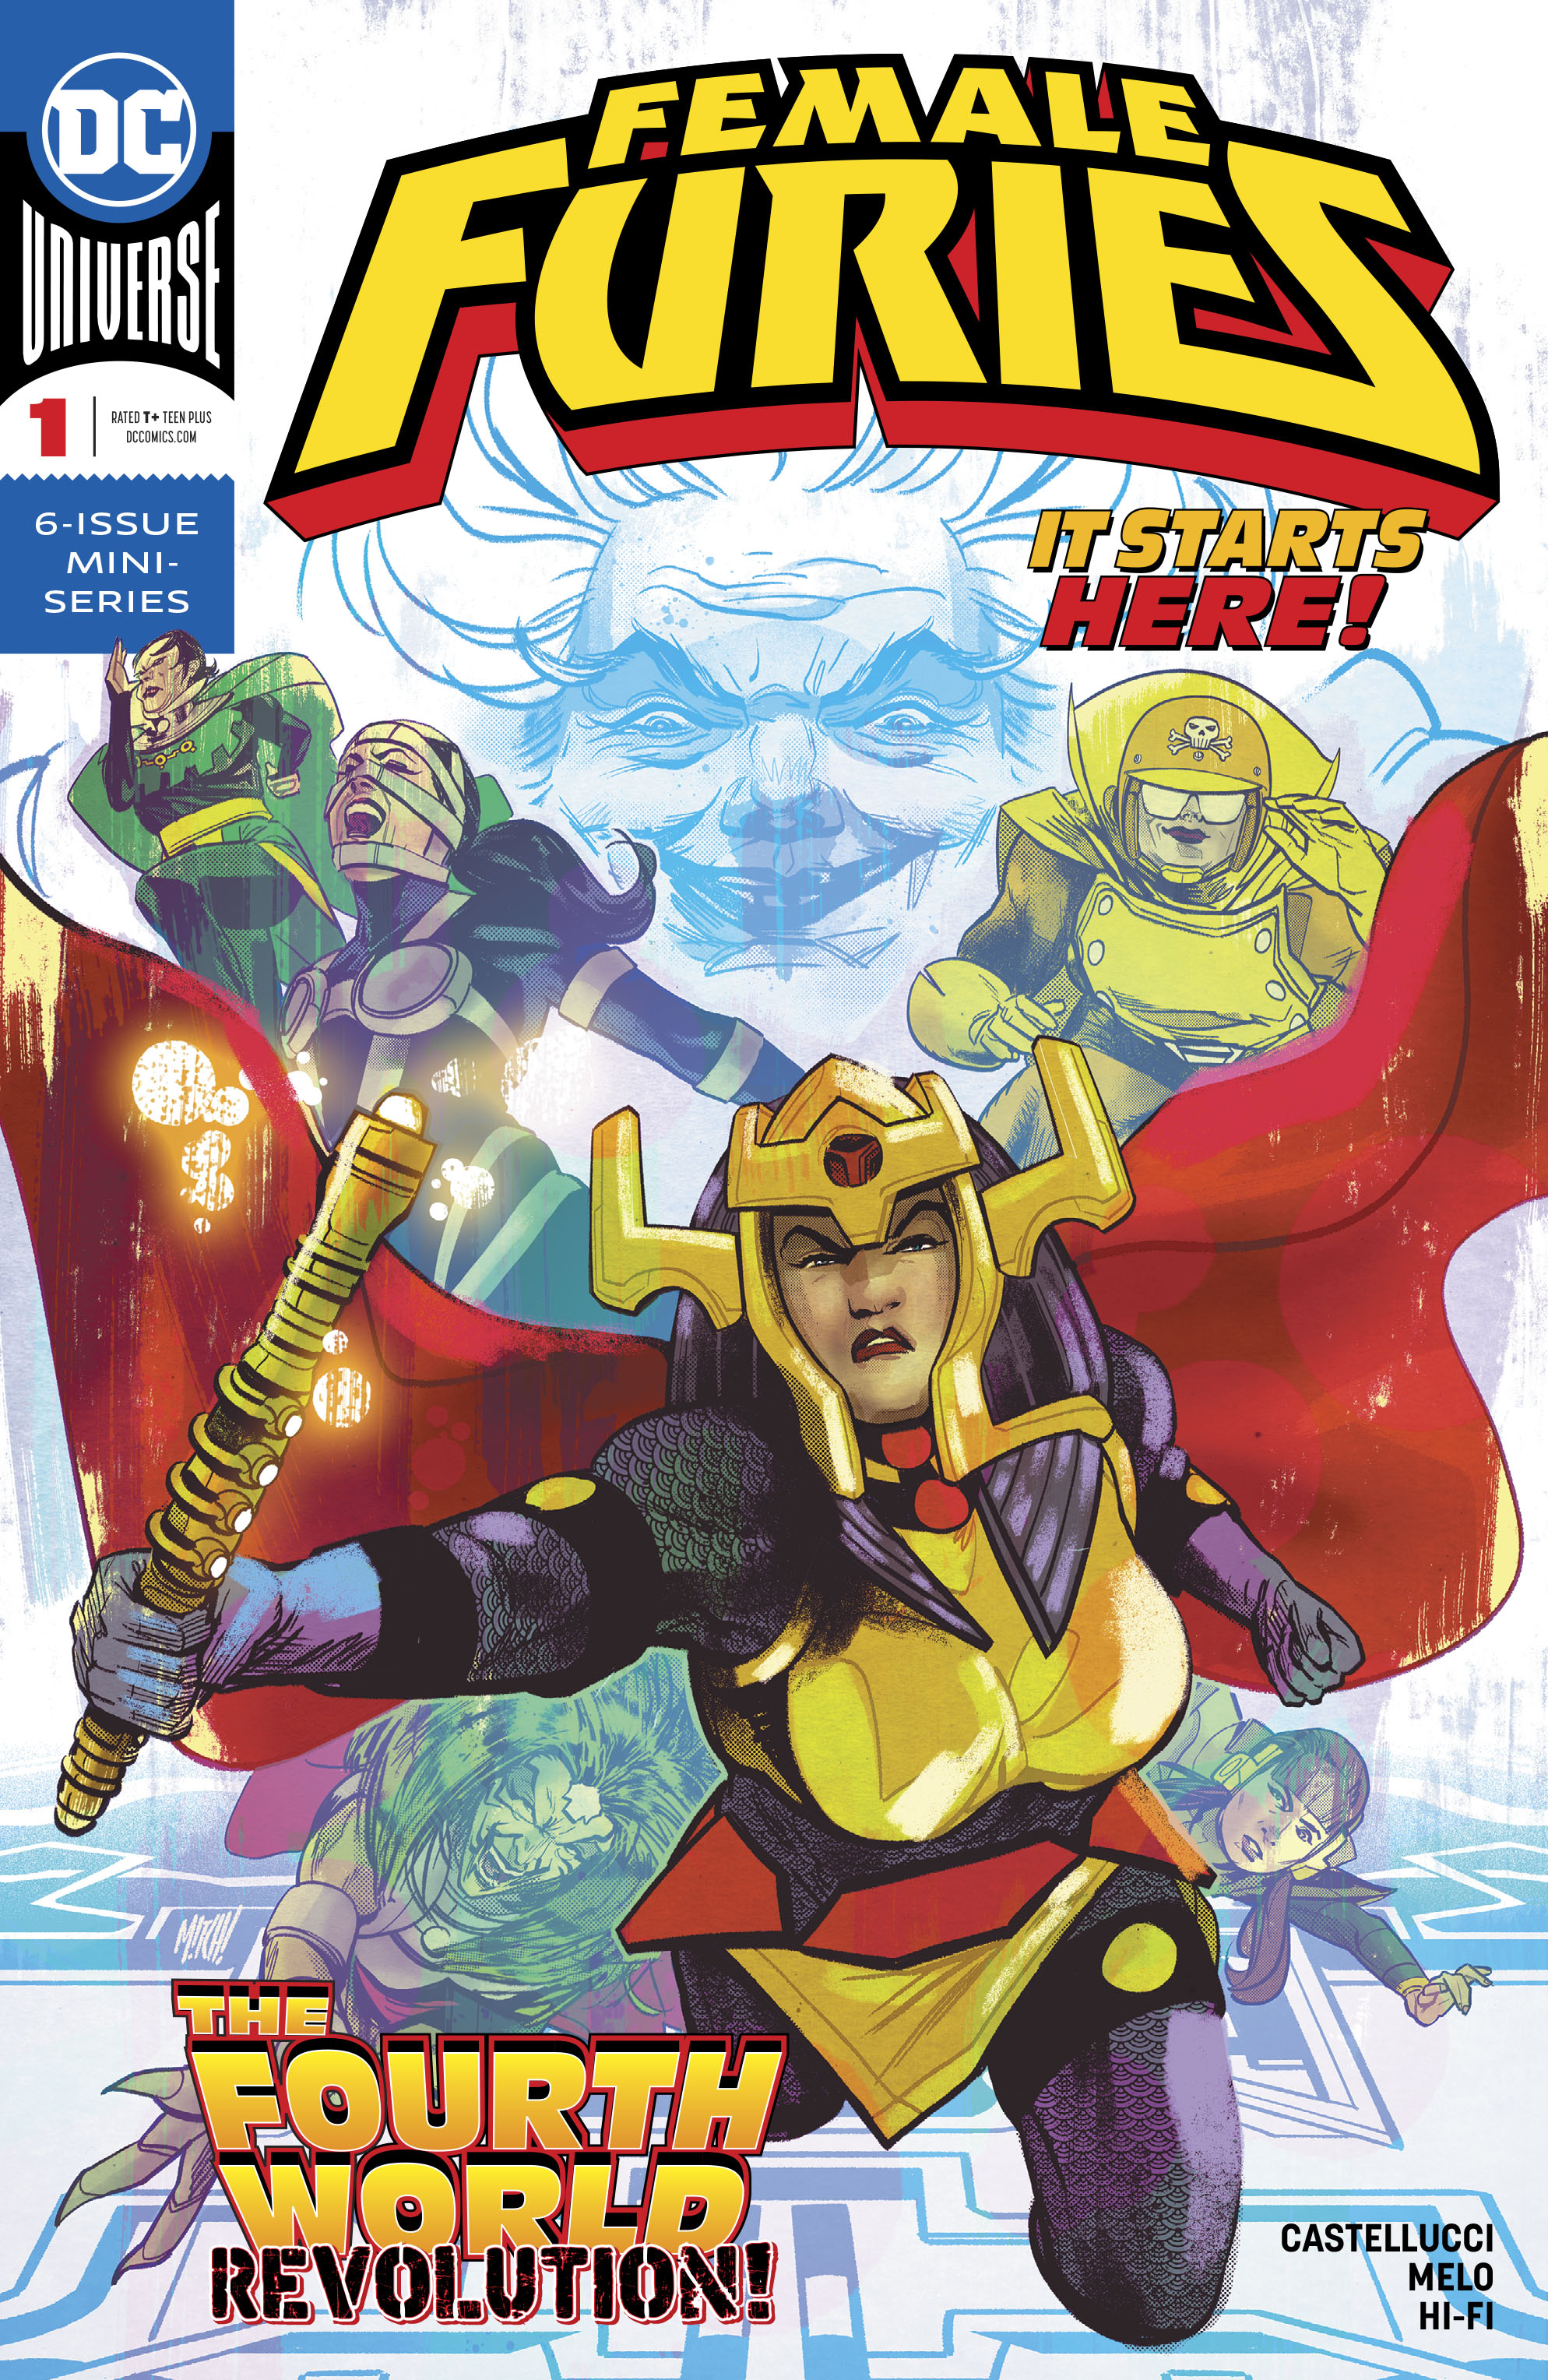 Read online Female Furies comic -  Issue #1 - 1